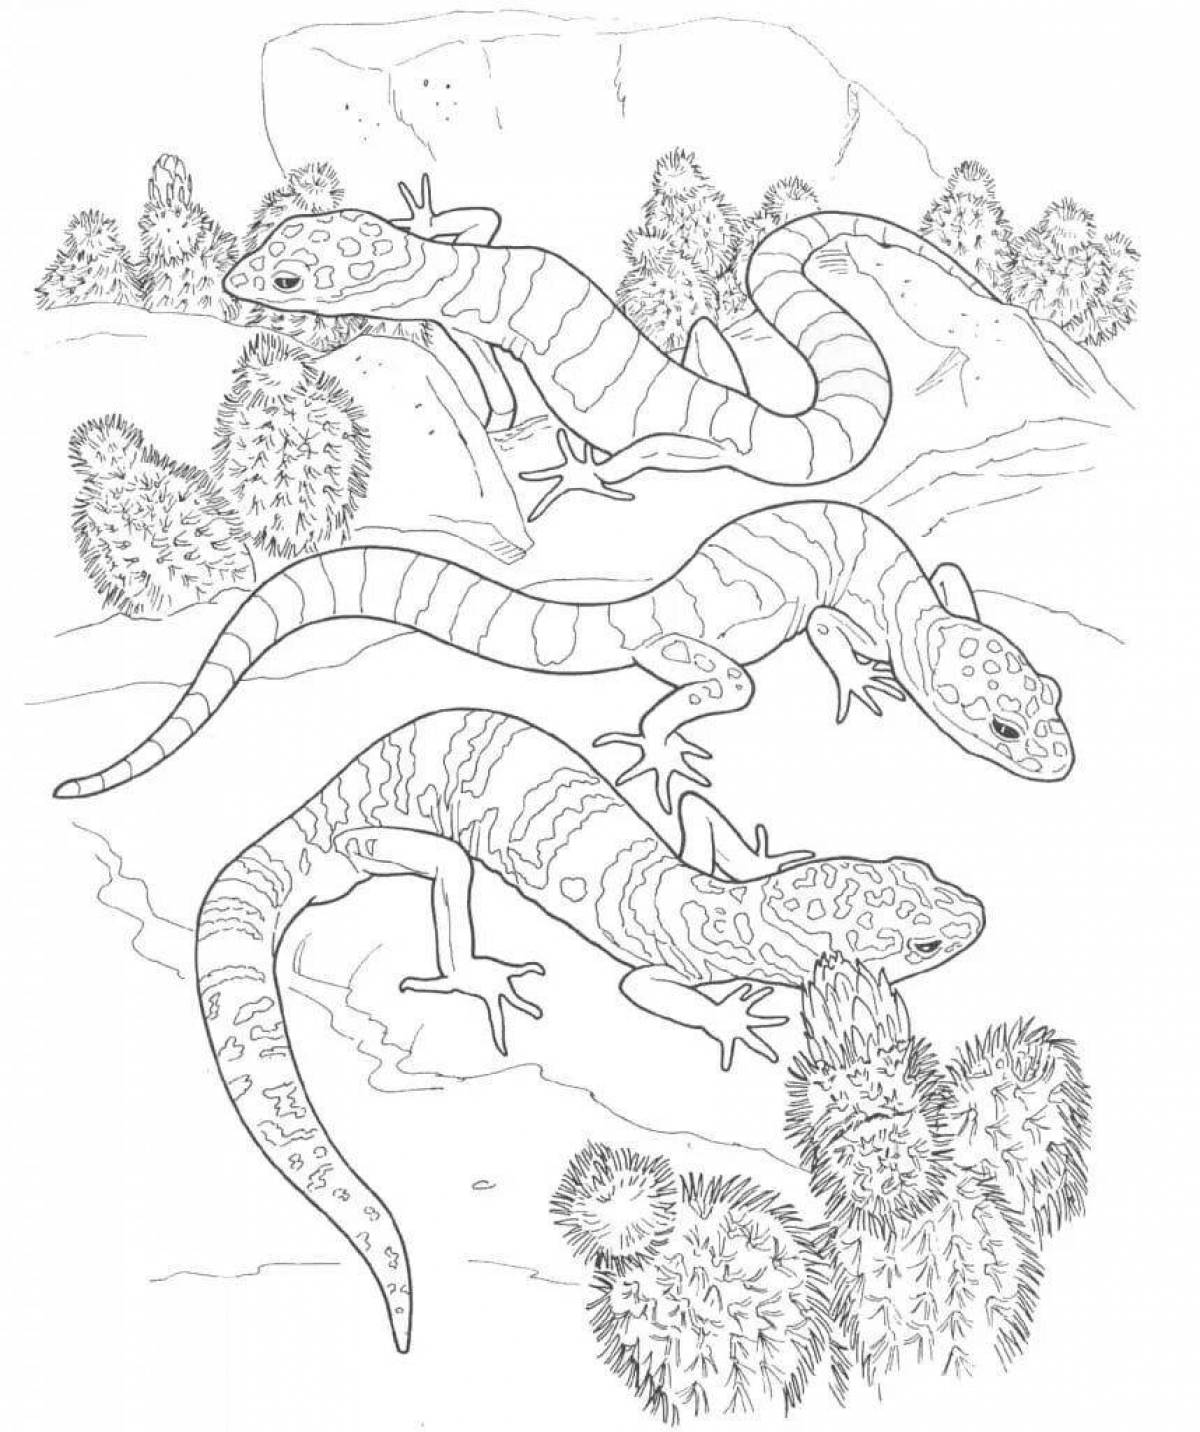 Reptile Live Coloring Pages